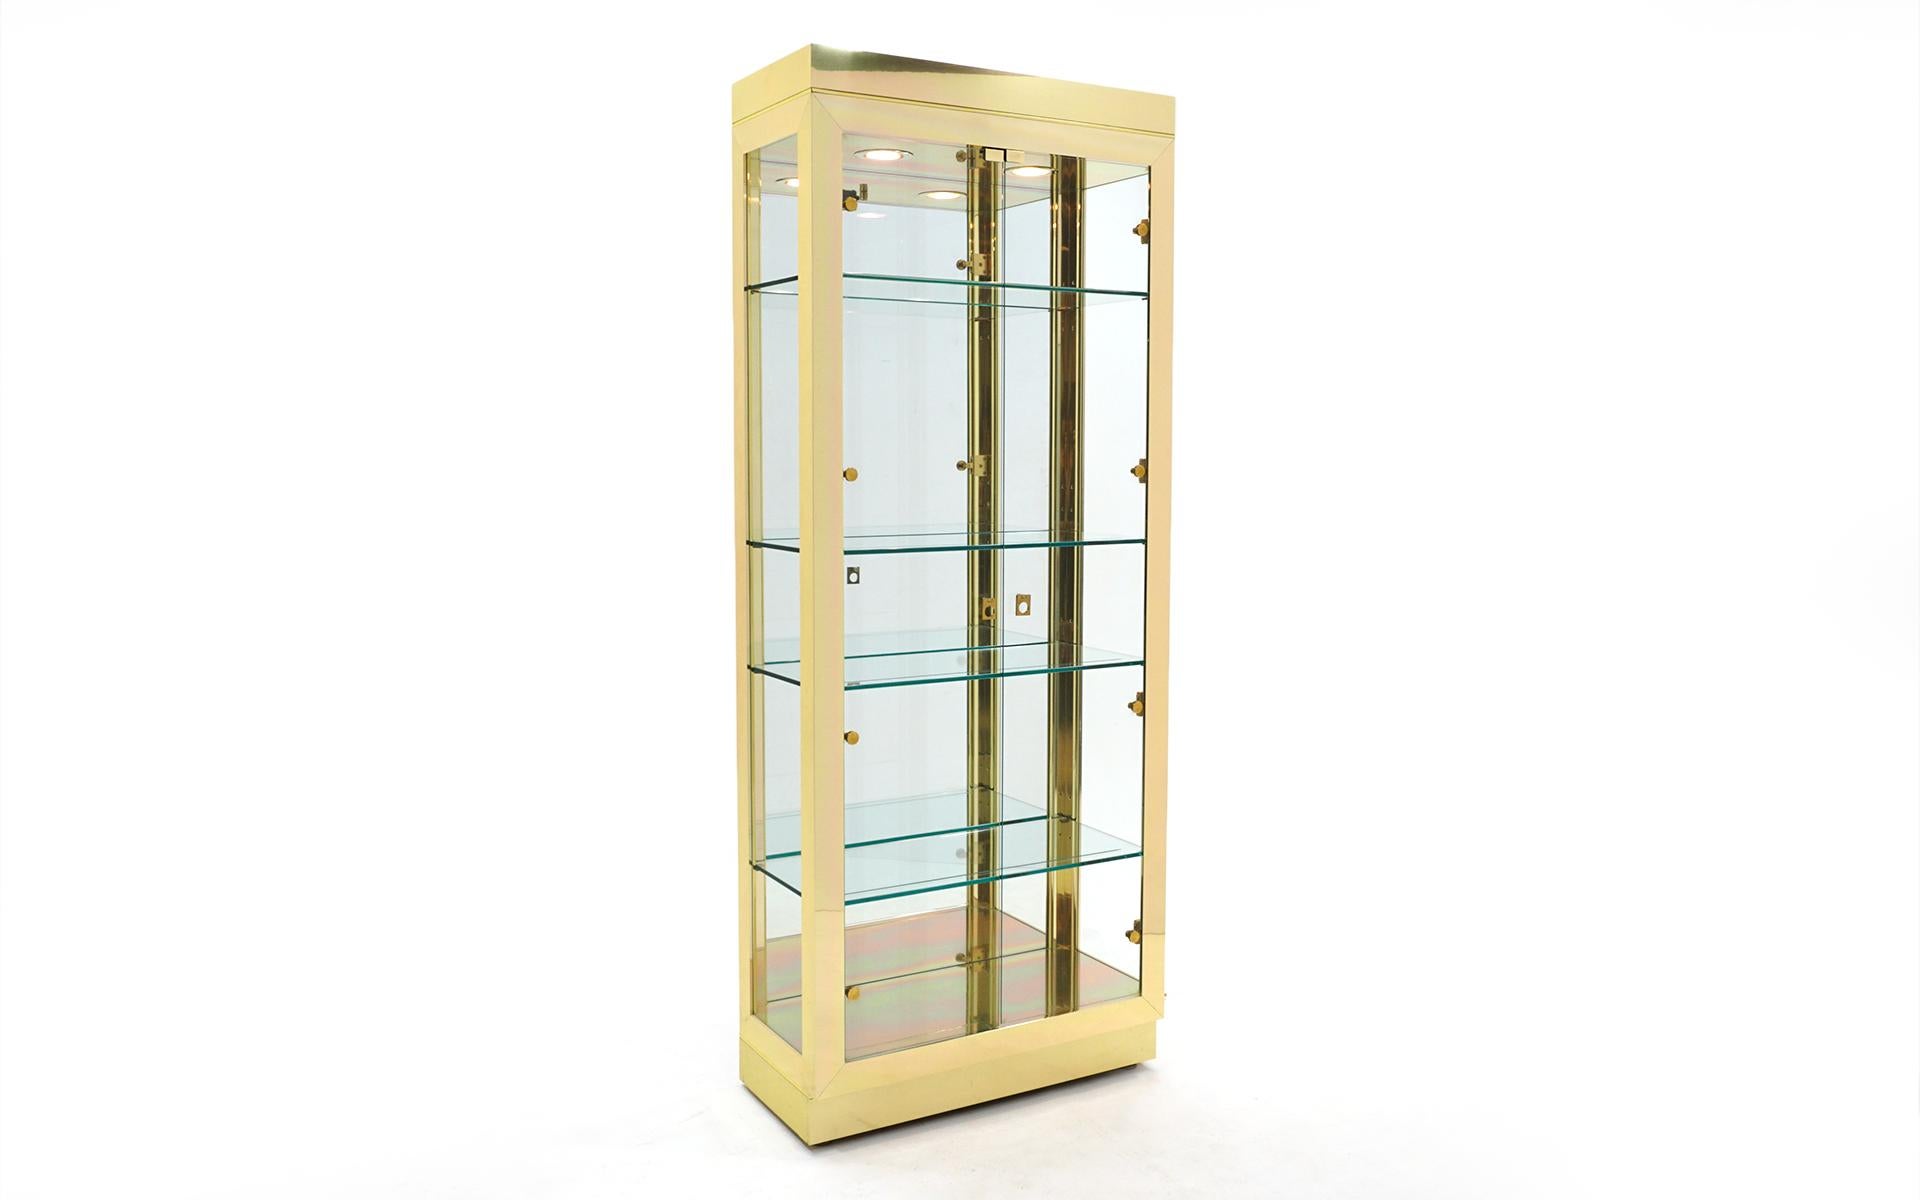 Vertical Display / Storage cabinet in brass with four adjustable glass shelves and mirrored inside back (this making it difficult to photograph!).  It is even better in person.  Super high quality construction possibly by Pace or Ello.  Completely